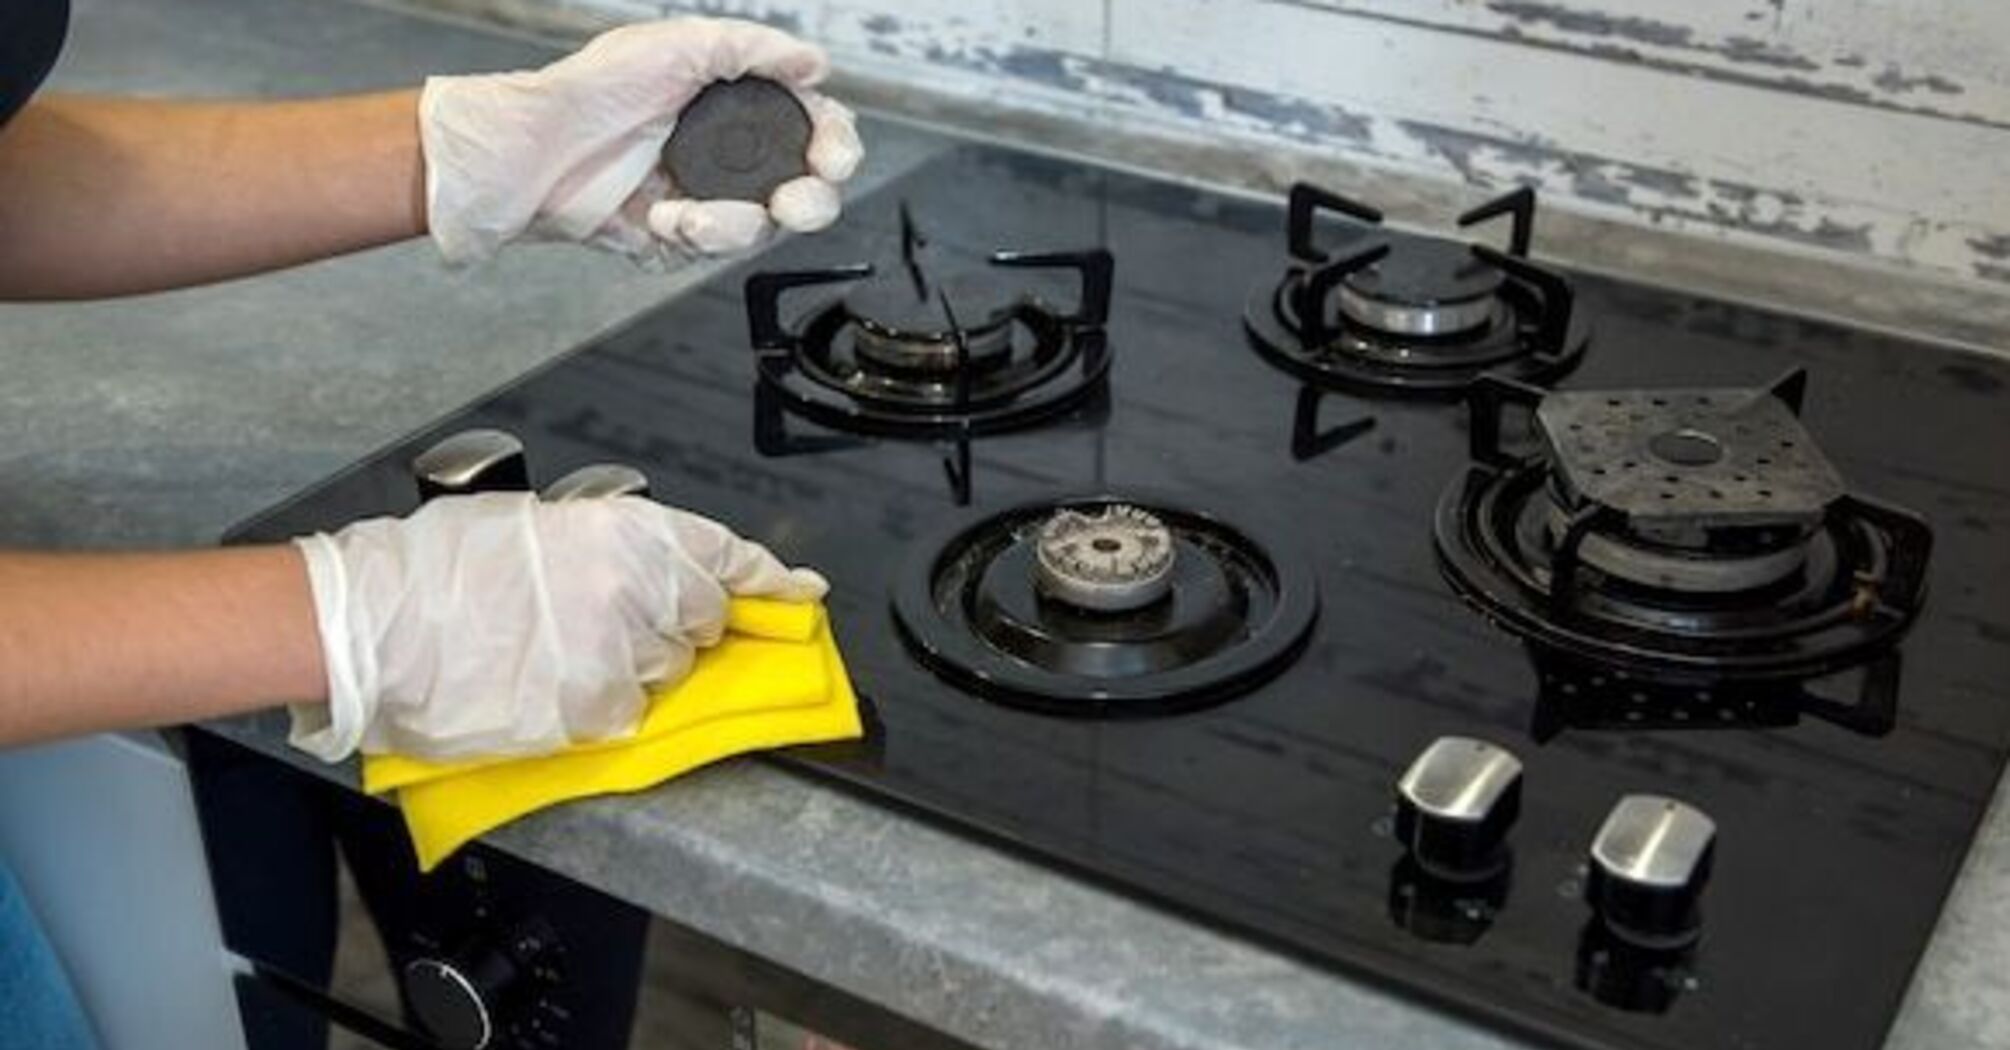 How to quickly clean a stove from grease: Effective tips for achieving cleanliness